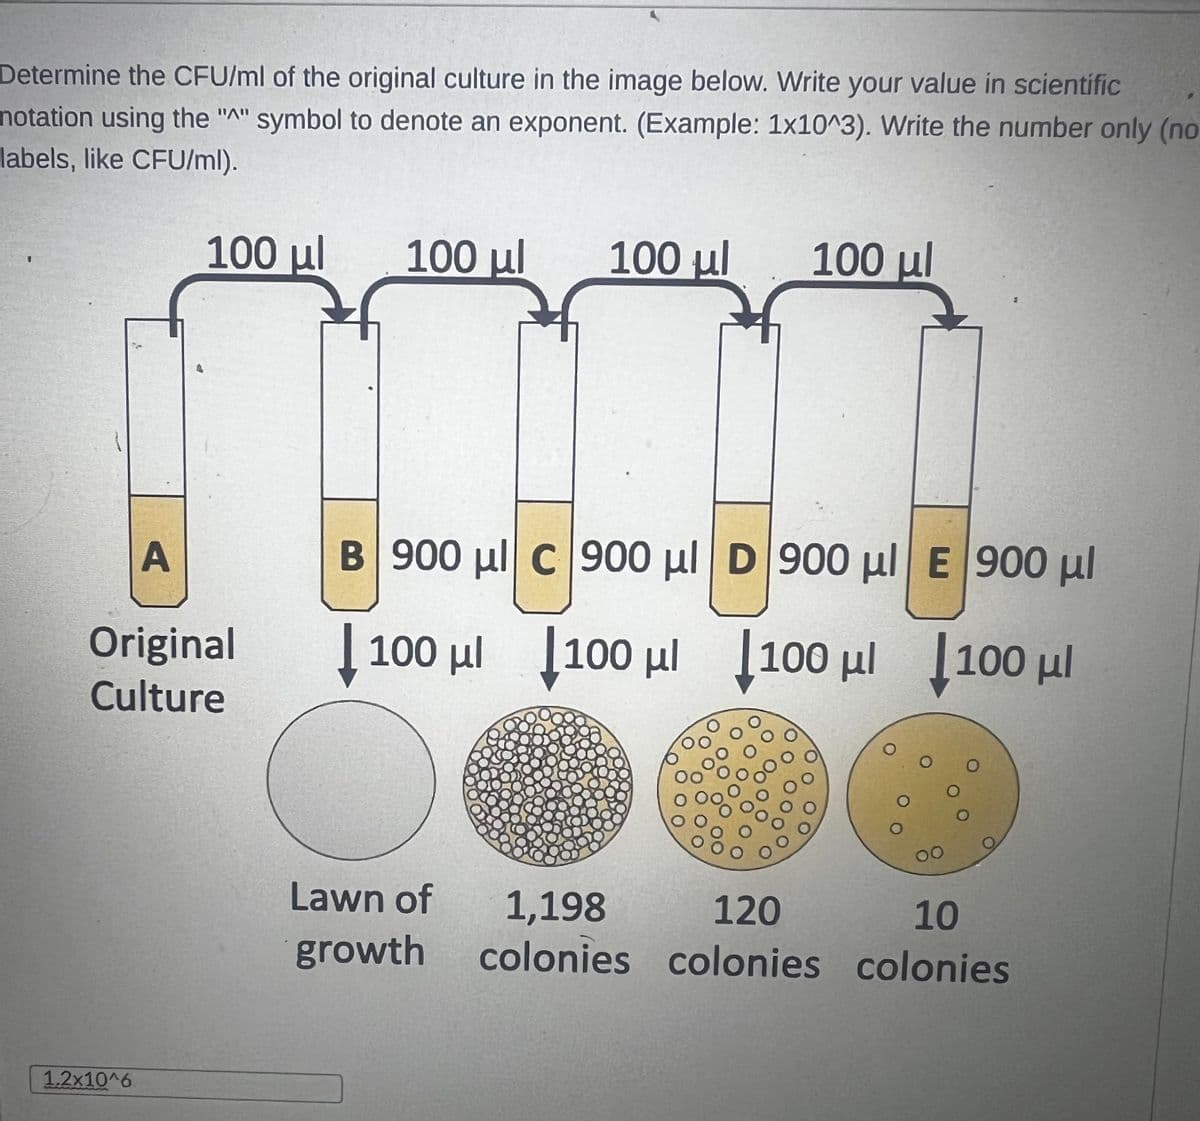 Determine the CFU/ml of the original culture in the image below. Write your value in scientific
notation using the "^" symbol to denote an exponent. (Example: 1x10^3). Write the number only (no
labels, like CFU/ml).
100 μ.
.
A
Original
Culture
1.2x10^6
100 μ.
100 μ.
Lawn of
growth
100 μ.
B΄900 ul c|900 μl | D |900 μ. € 900 μ.
| 100 με
1100 με 1100 με 1100 μ.
1,198
120
colonies colonies
O
00
10
colonies